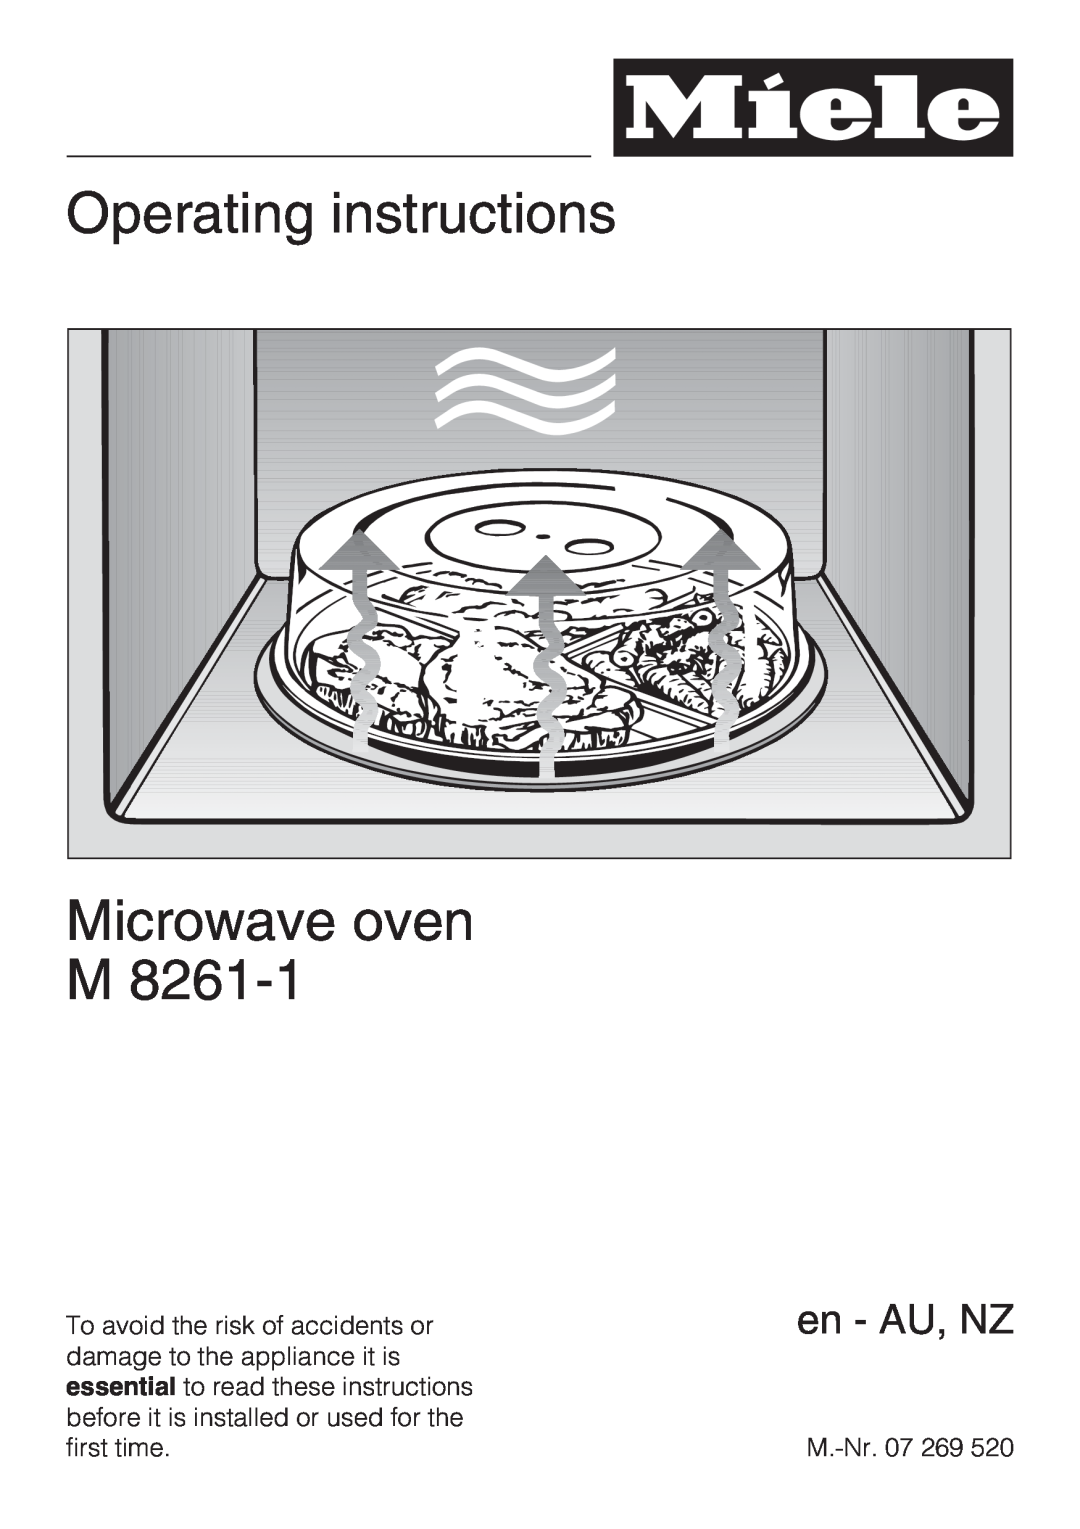 Miele M 8261-1 manual Operating instructions, Microwave oven, en - AU, NZ 